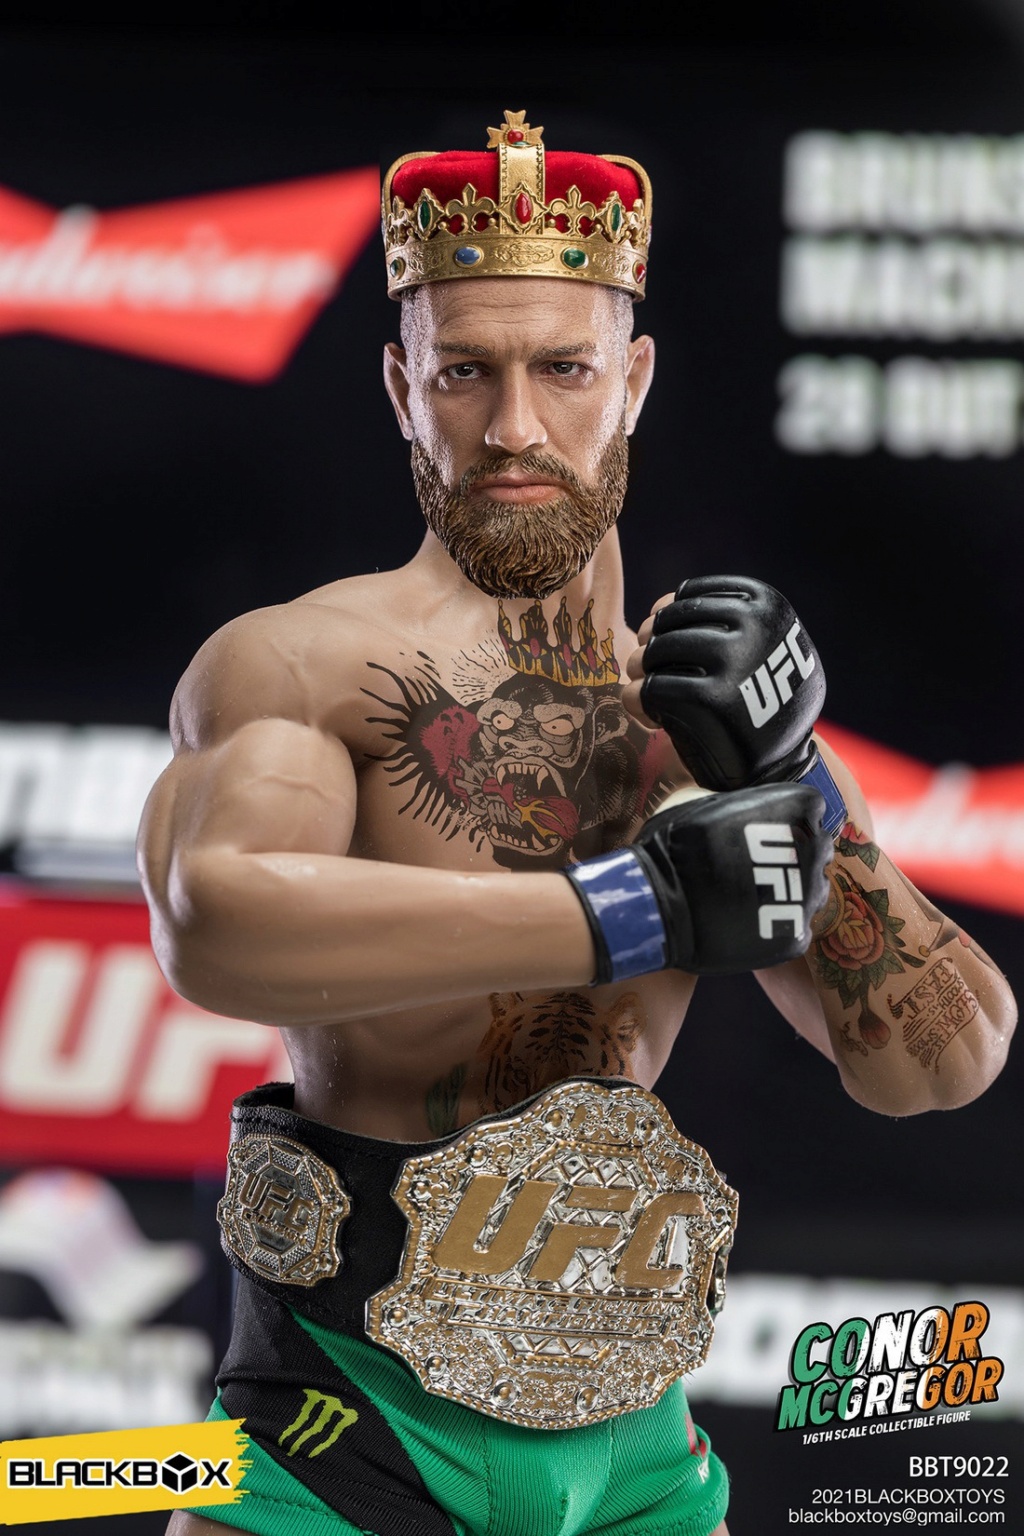 UltimateFightingKing - NEW PRODUCT: BLACKBOX: 1/6 Who Am I Series-The Ultimate Fighting King Connor-McGregor CONOR MCGREGOR 16353614